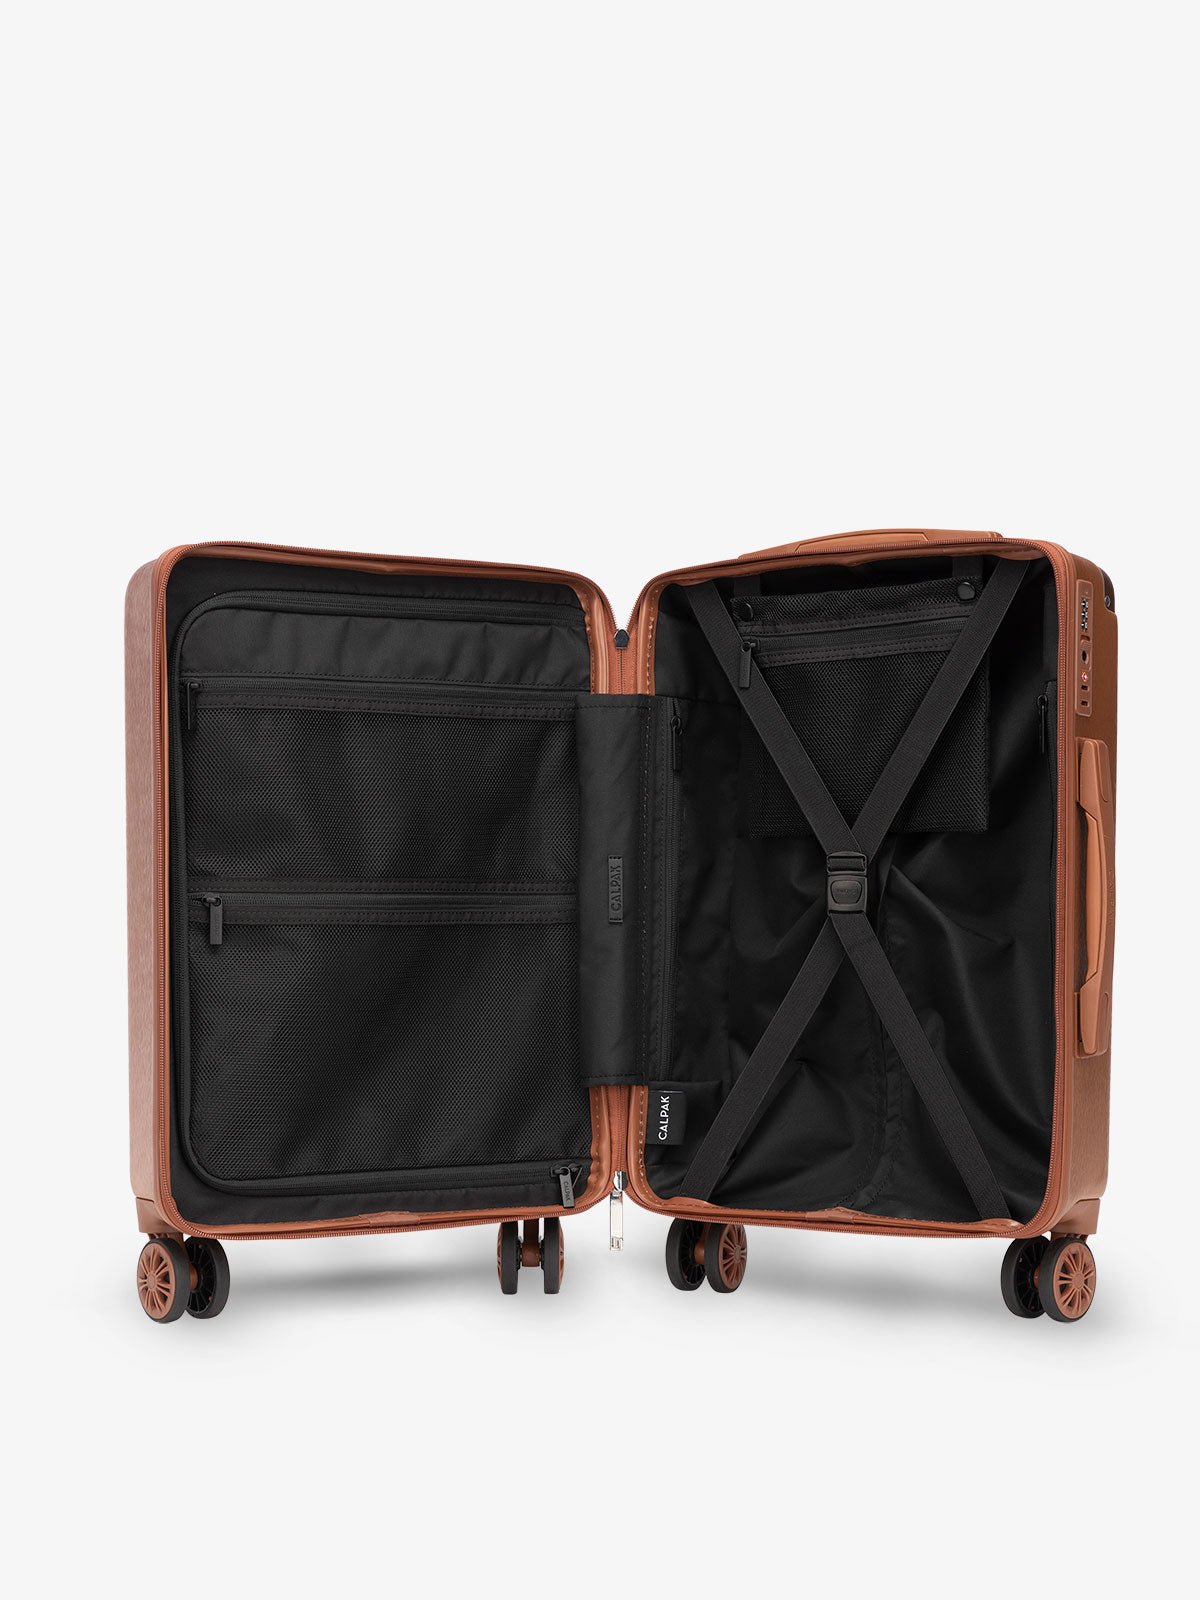 CALPAK Ambeur hard shell carry-on luggage with front pocket for laptop, built-in TSA lock, interior divider with multiple pockets and compression strap in copper